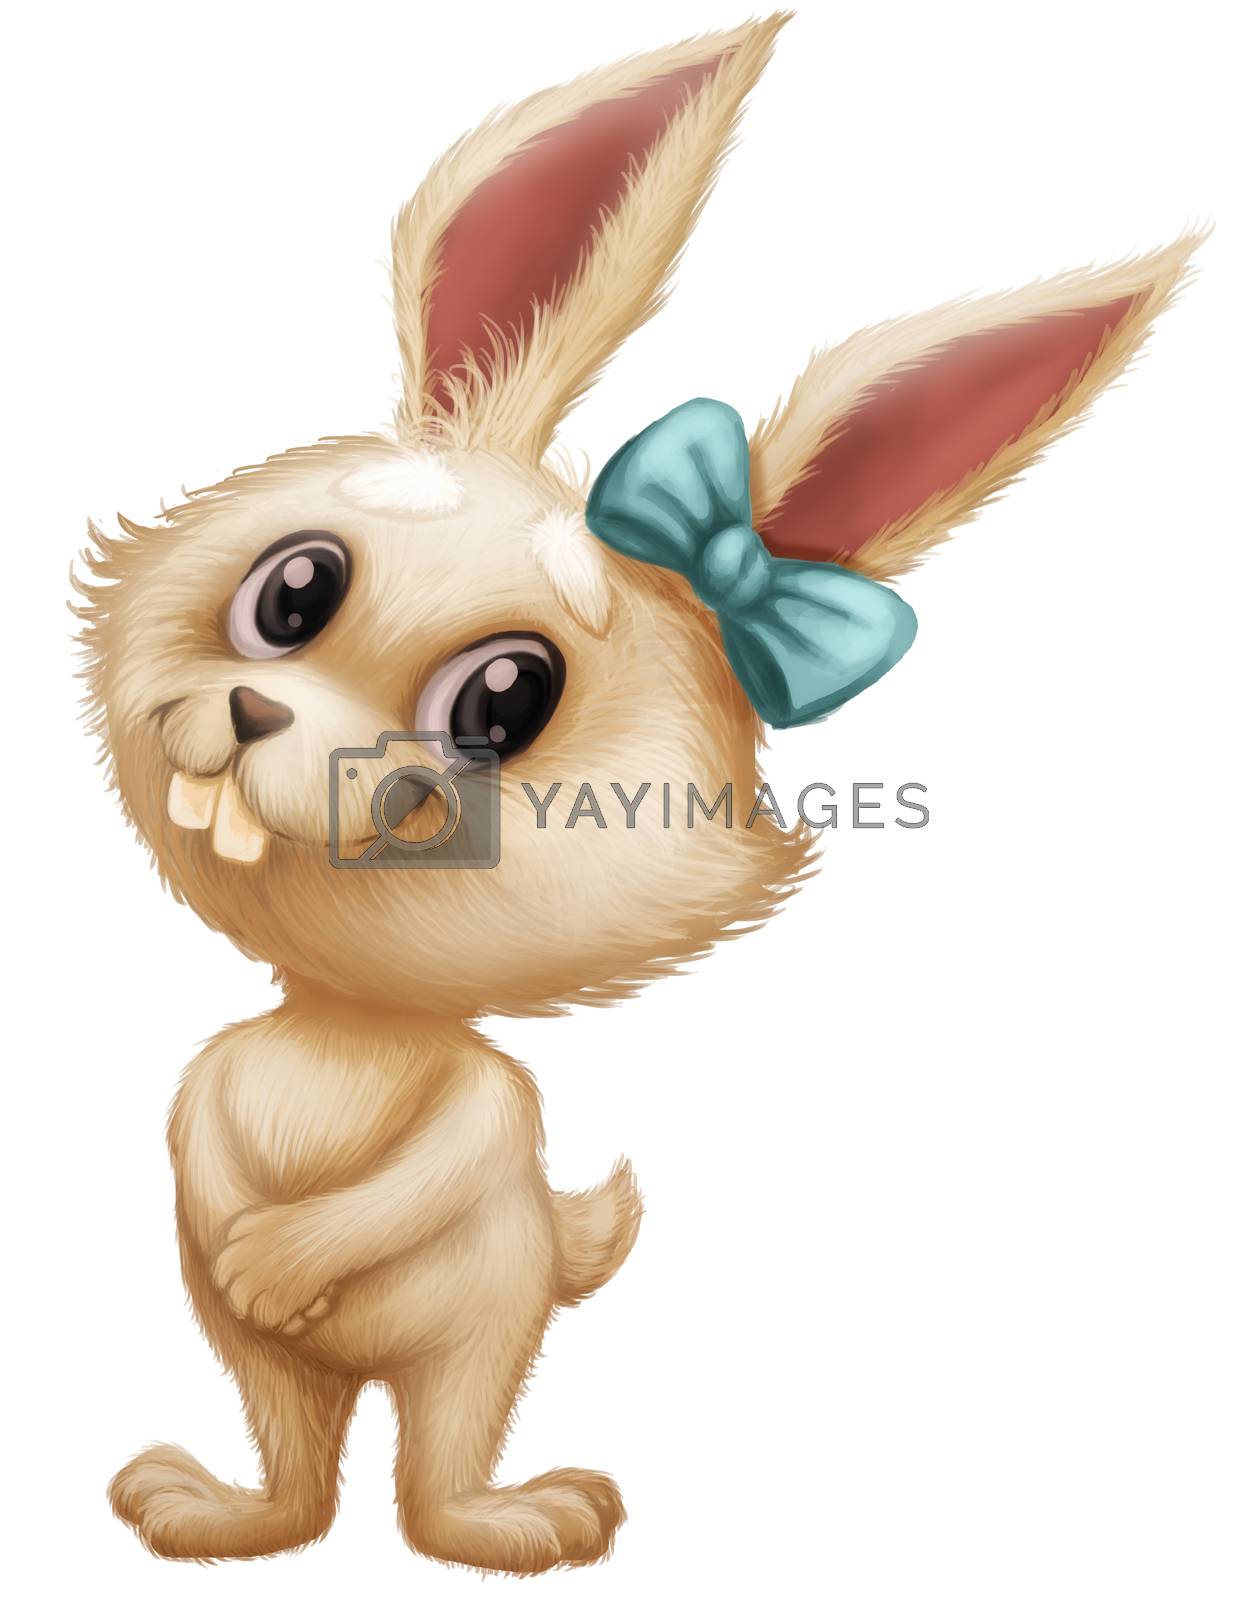 Royalty free image of Cute Furry Bunny Cartoon Animal Character Mascot Posing with Big Eyes and Smile by Loud-Mango